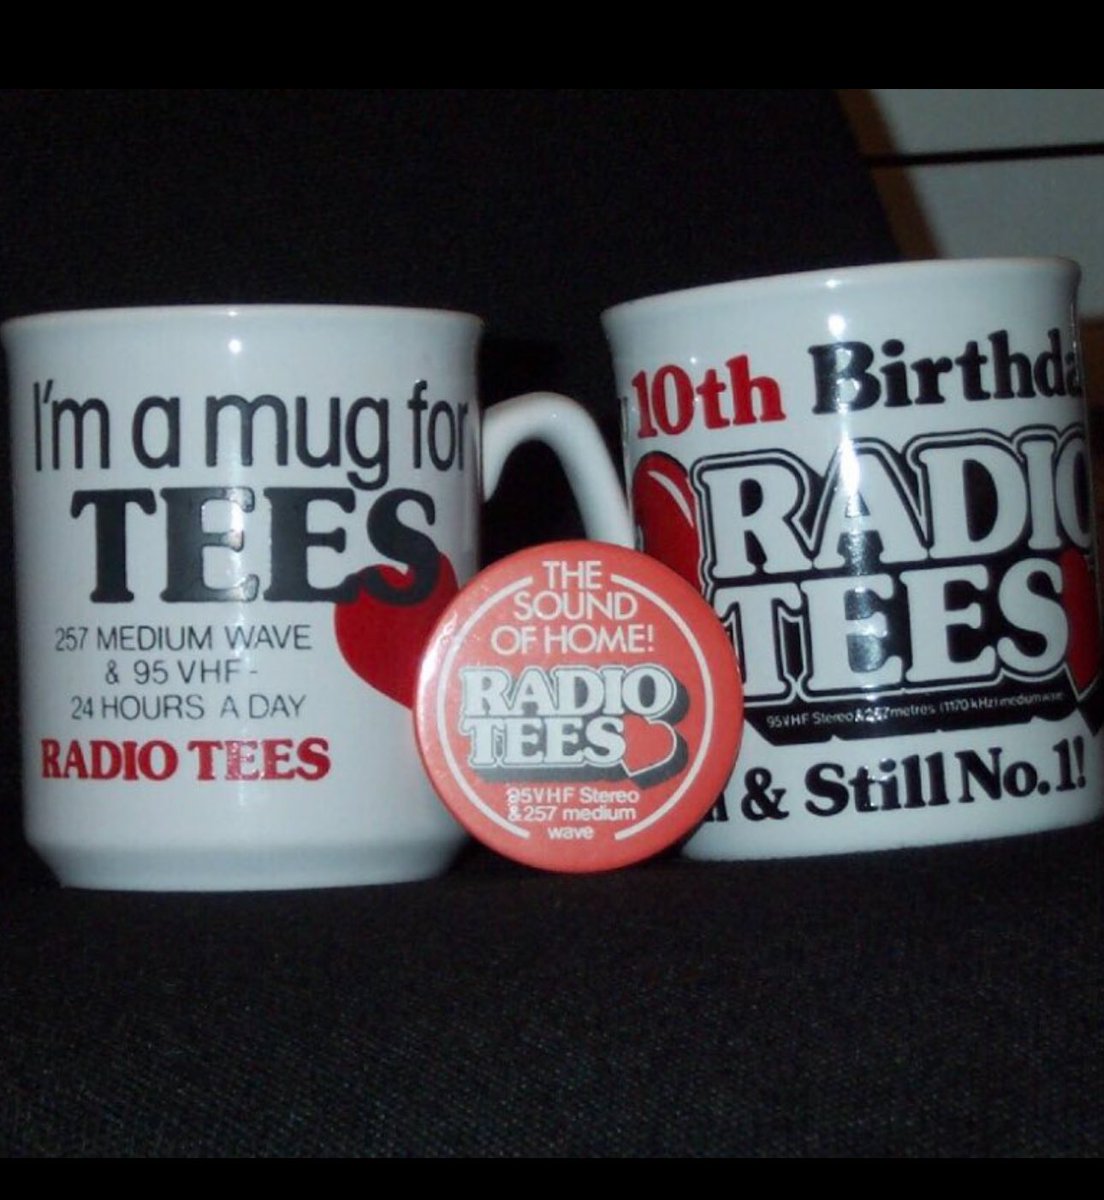 It’s time to say goodbye to some big radio brands today as they transition to @hitsradiouk. It’s goodbye to @TFMradio formerly #RadioTees who have been broadcasting to Teesside and the North East since 1975 #showusyourmugs (mug credit @johnfostervoice)